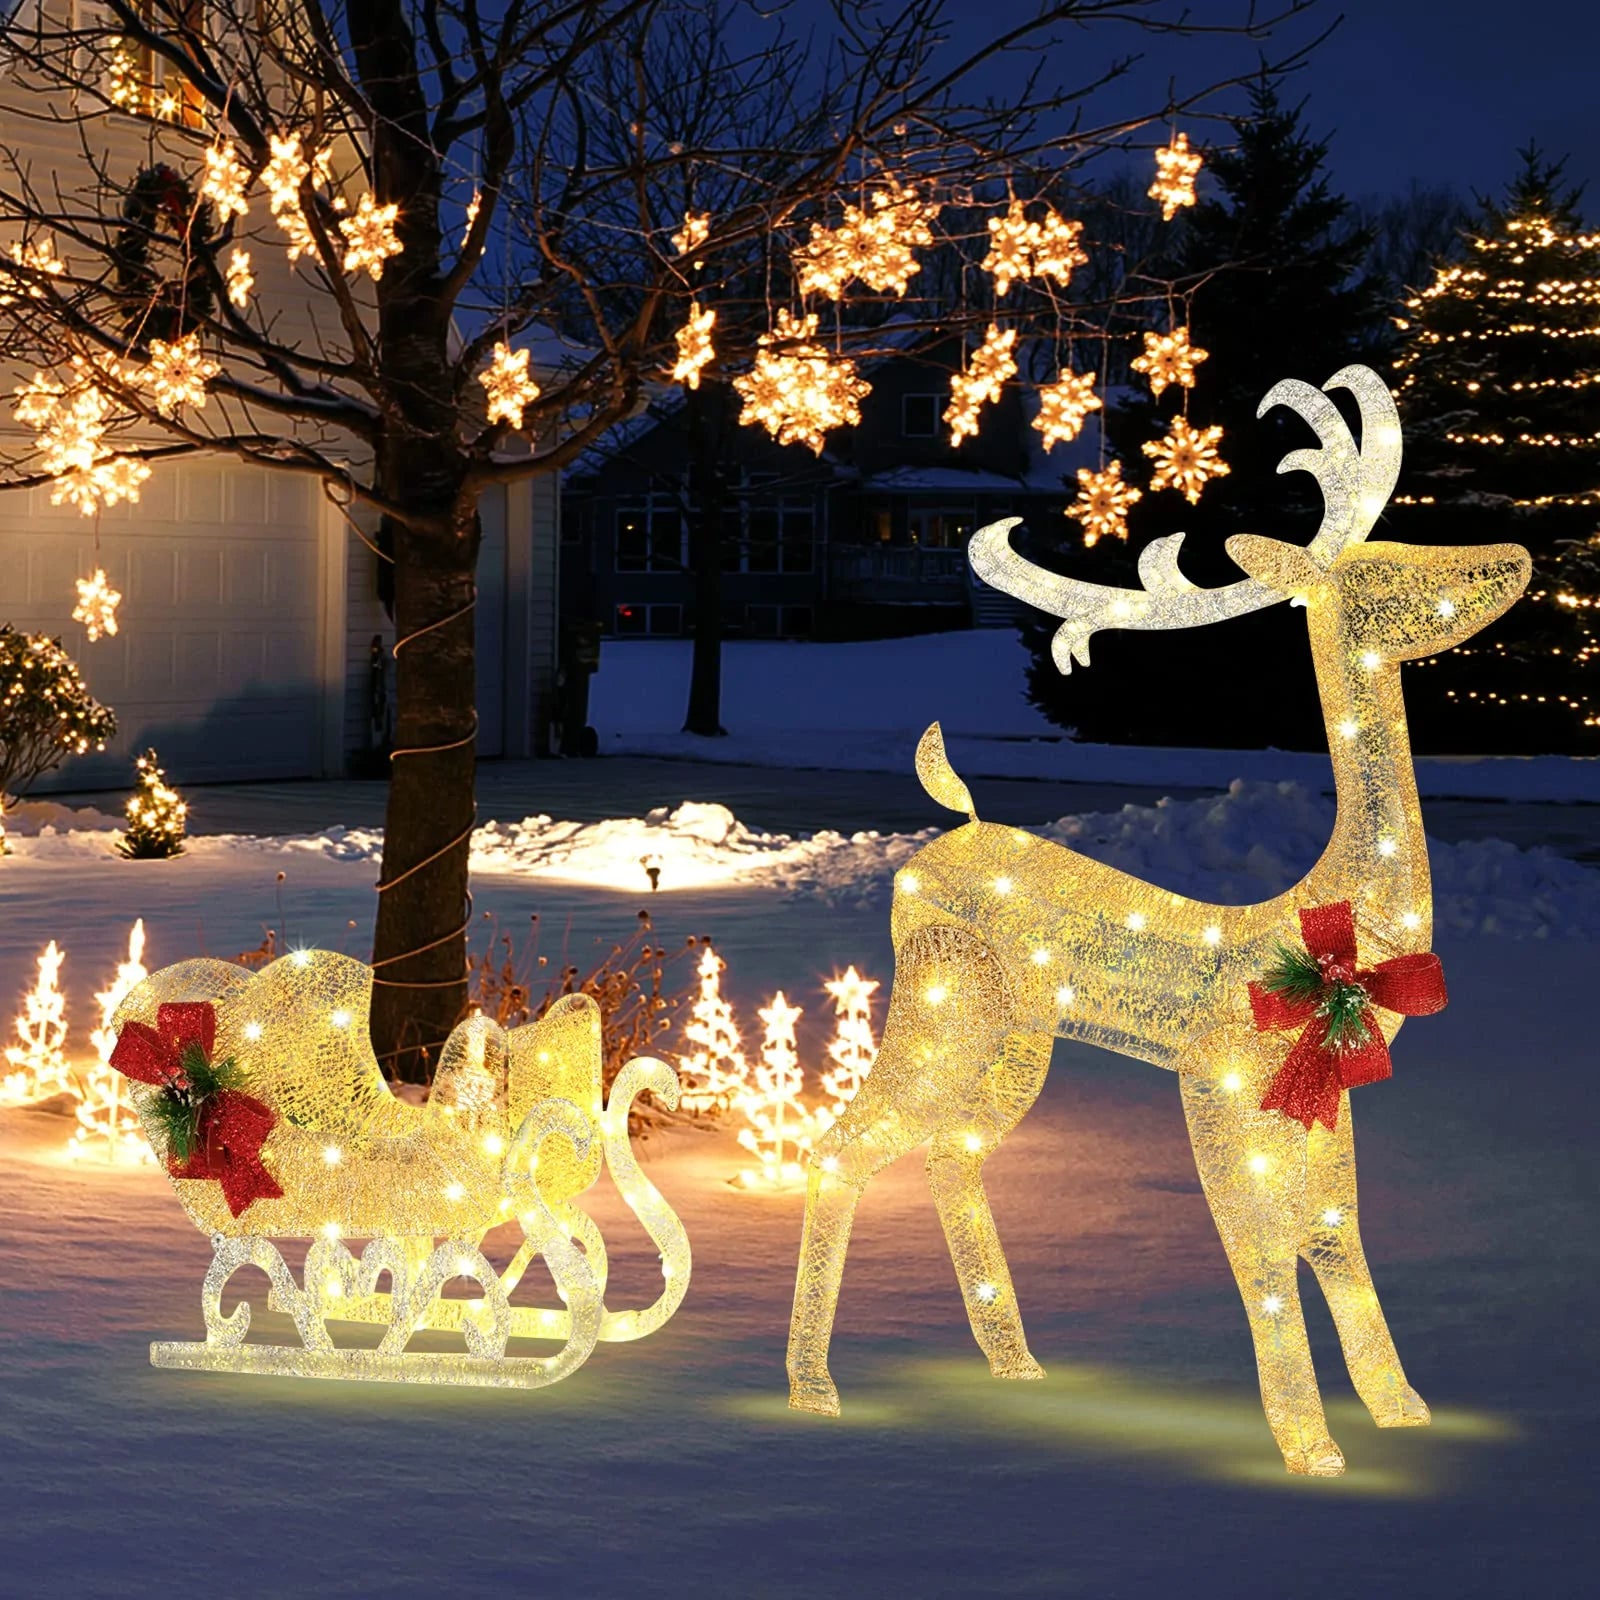 How To Add Christmas & New Year Festival Ambient To Your Home